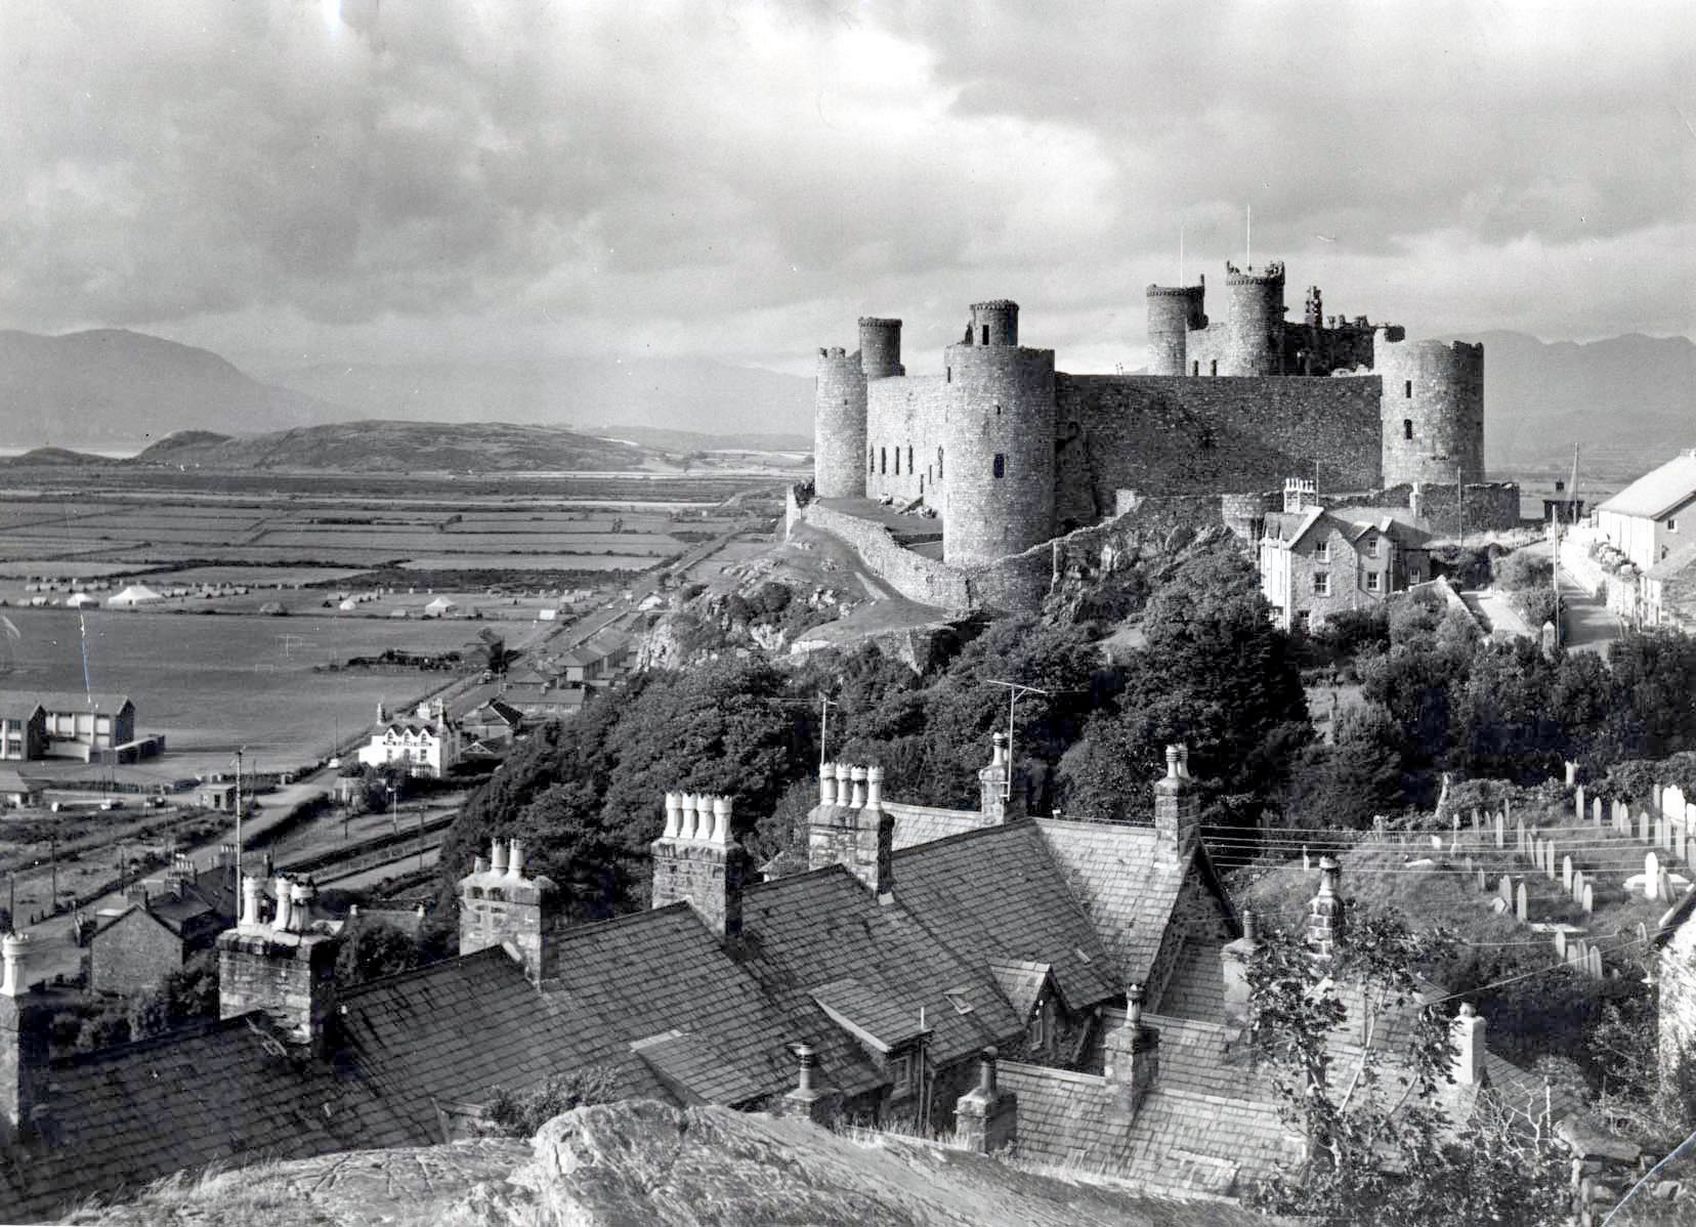 Harlech Castle in the early 1900s